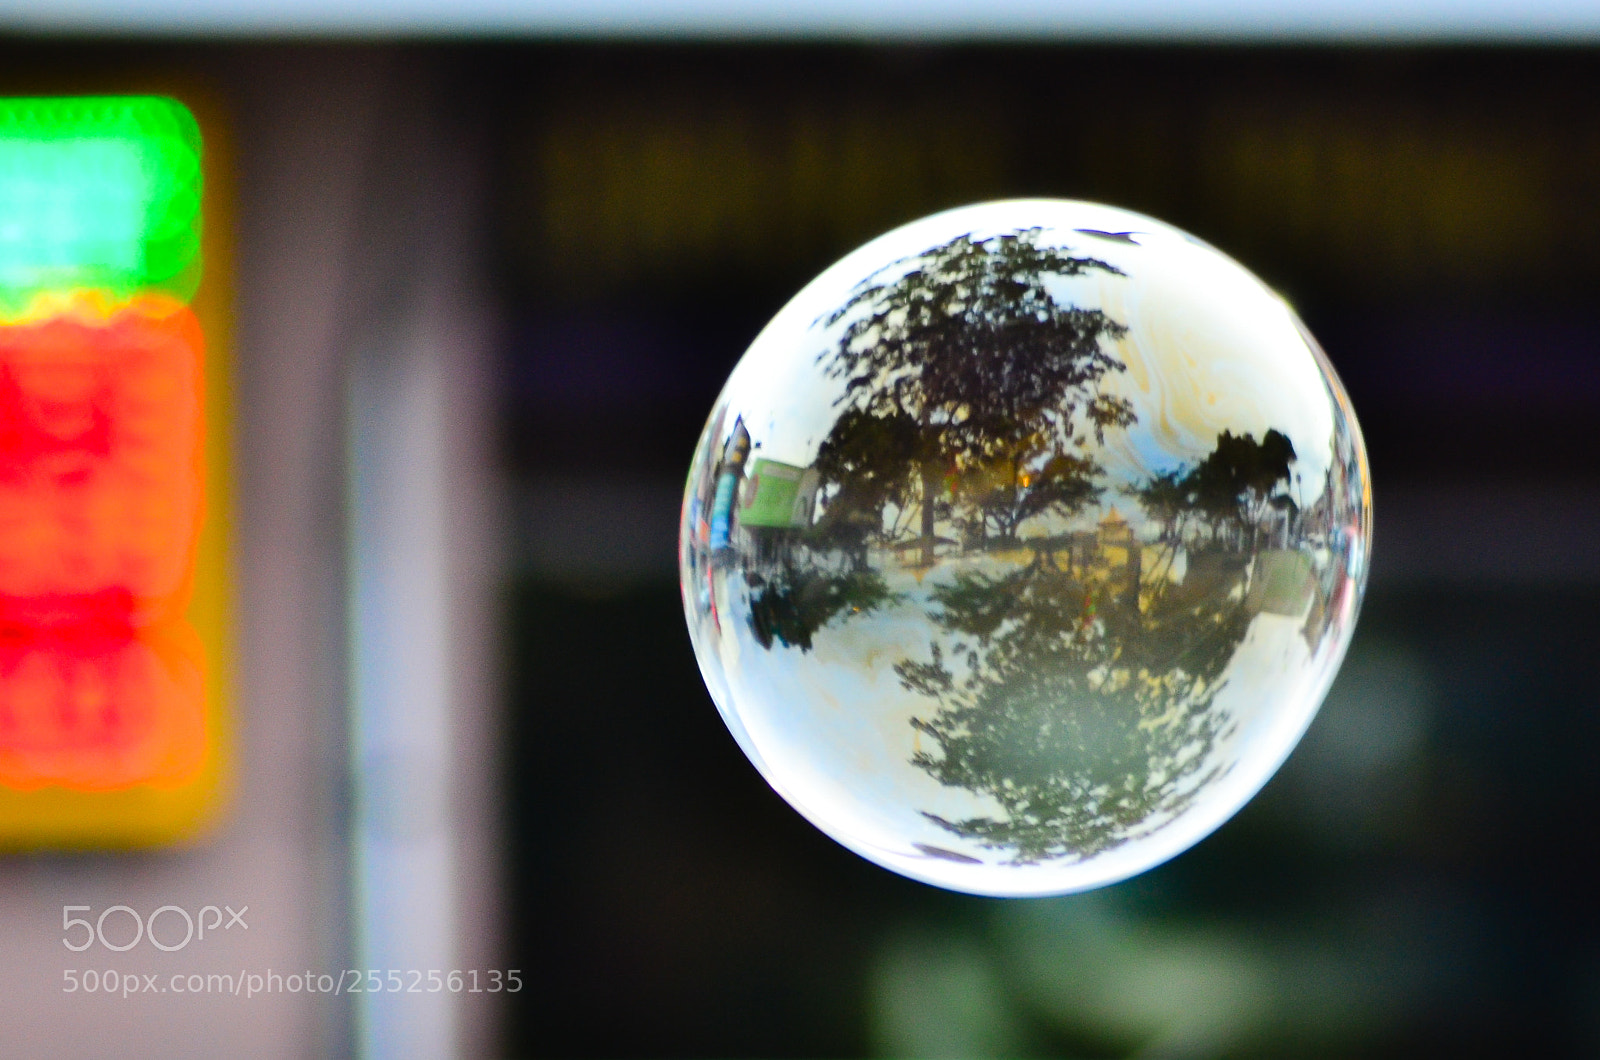 Nikon D7000 sample photo. Trapped in the bubble photography